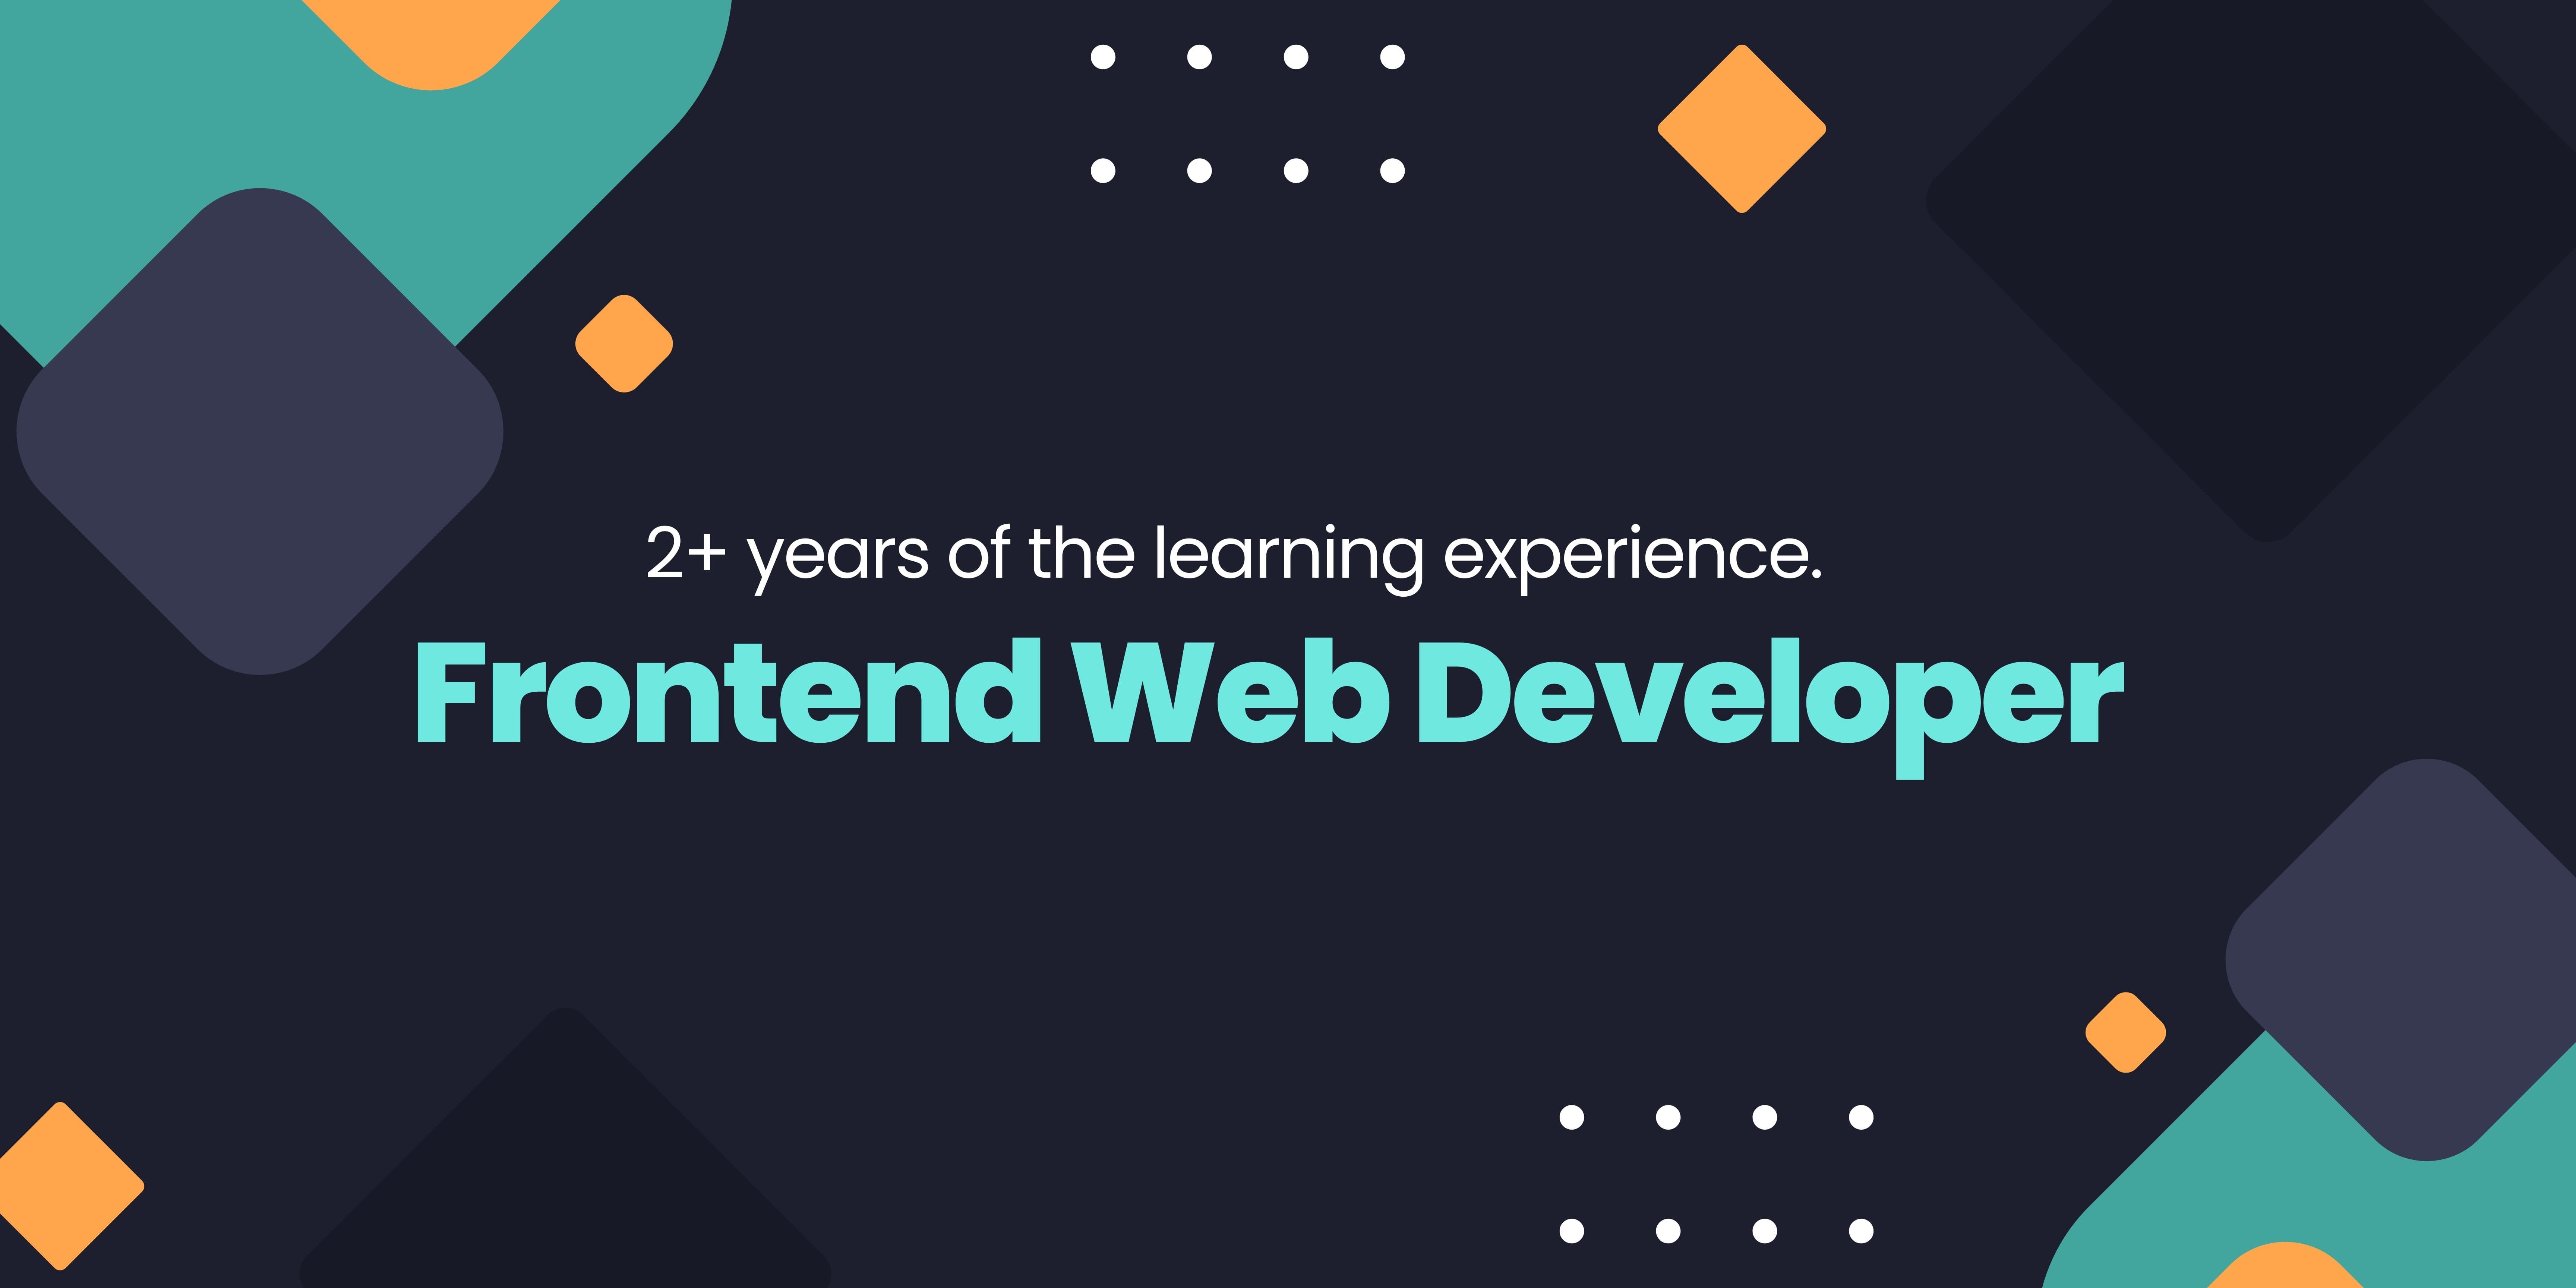 2+ years of the learning experience. Frontend Web Developer.